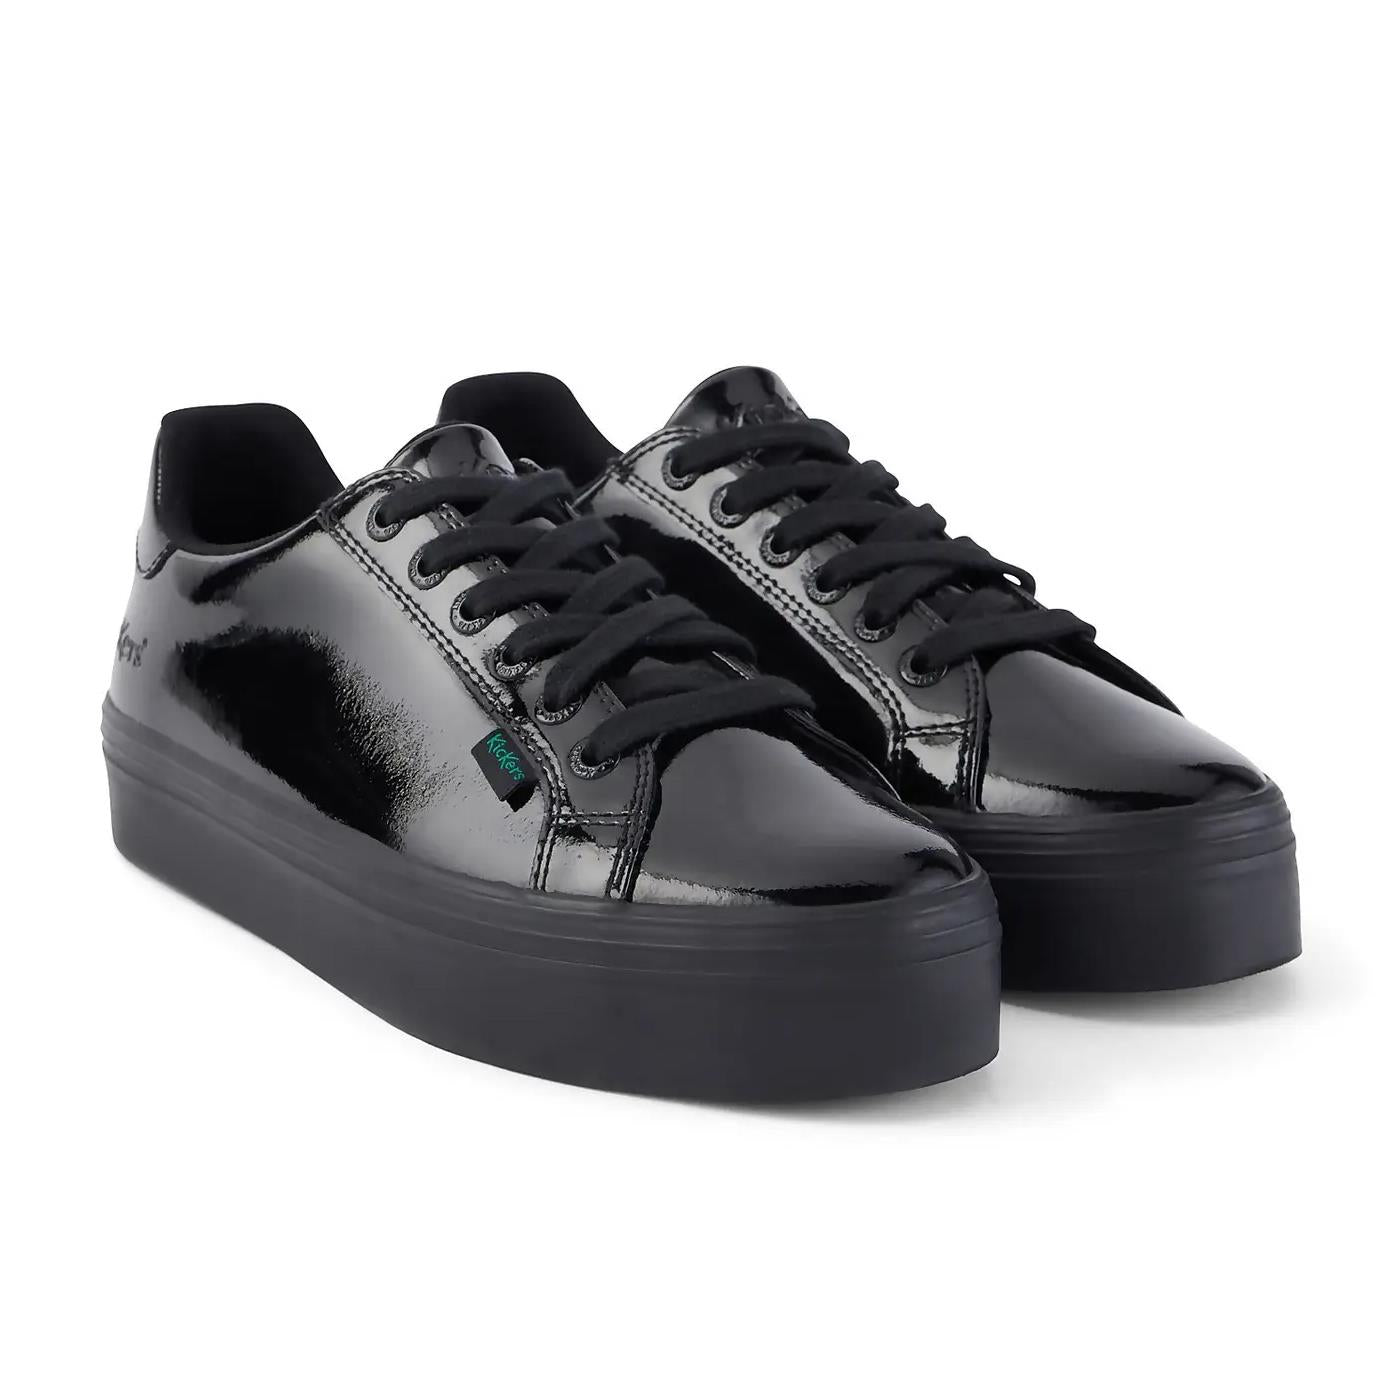 Kickers Tovni Stack Black Patent Leather Shoes 1-16231